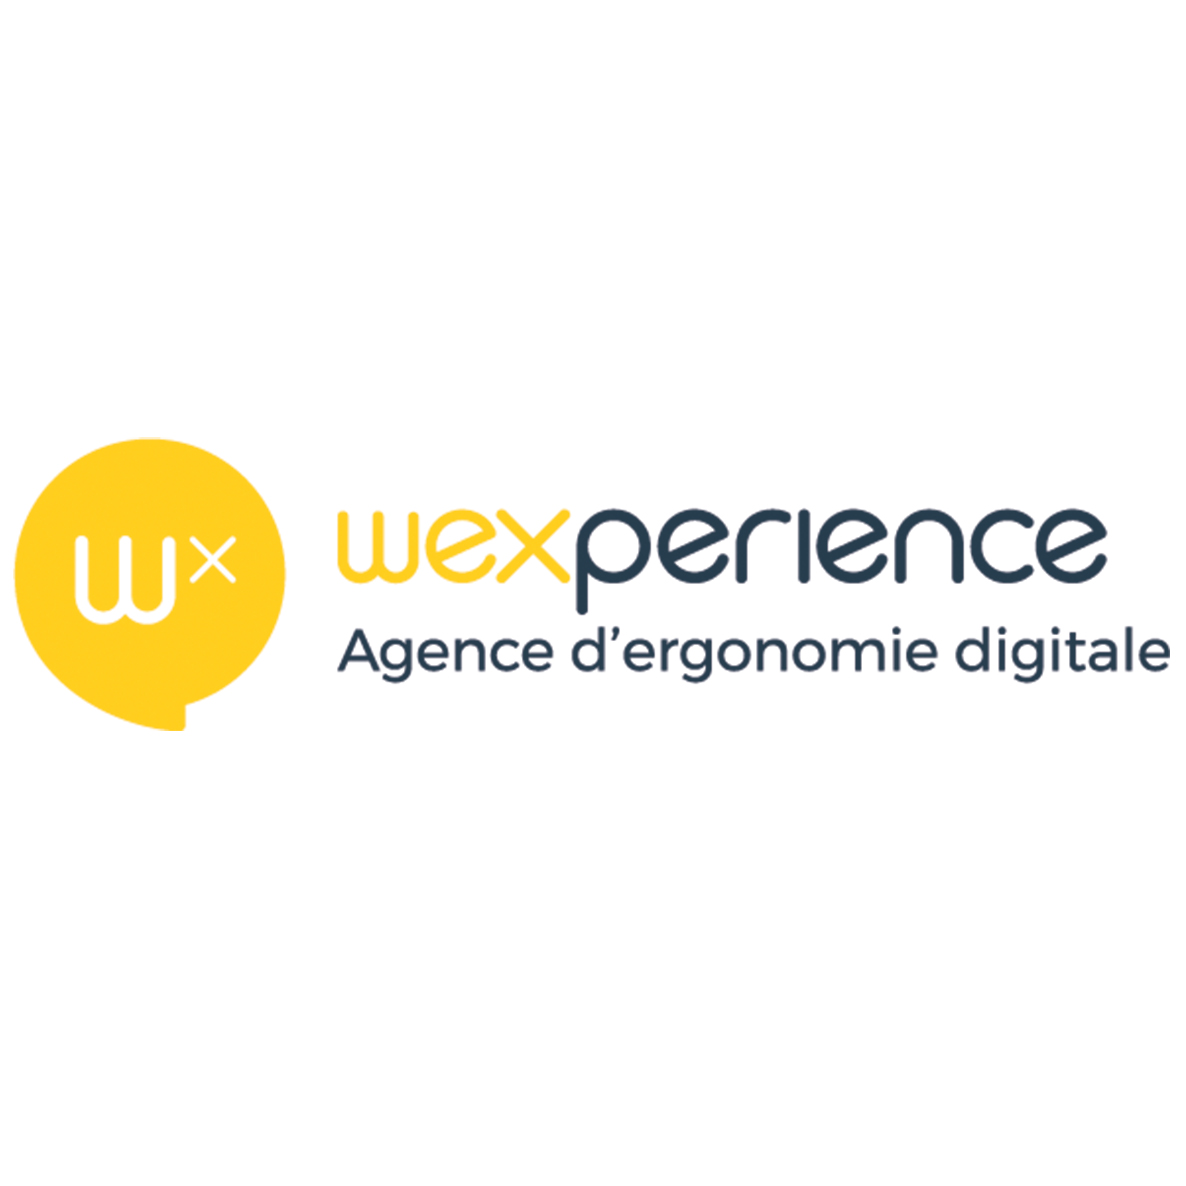 Wexperience